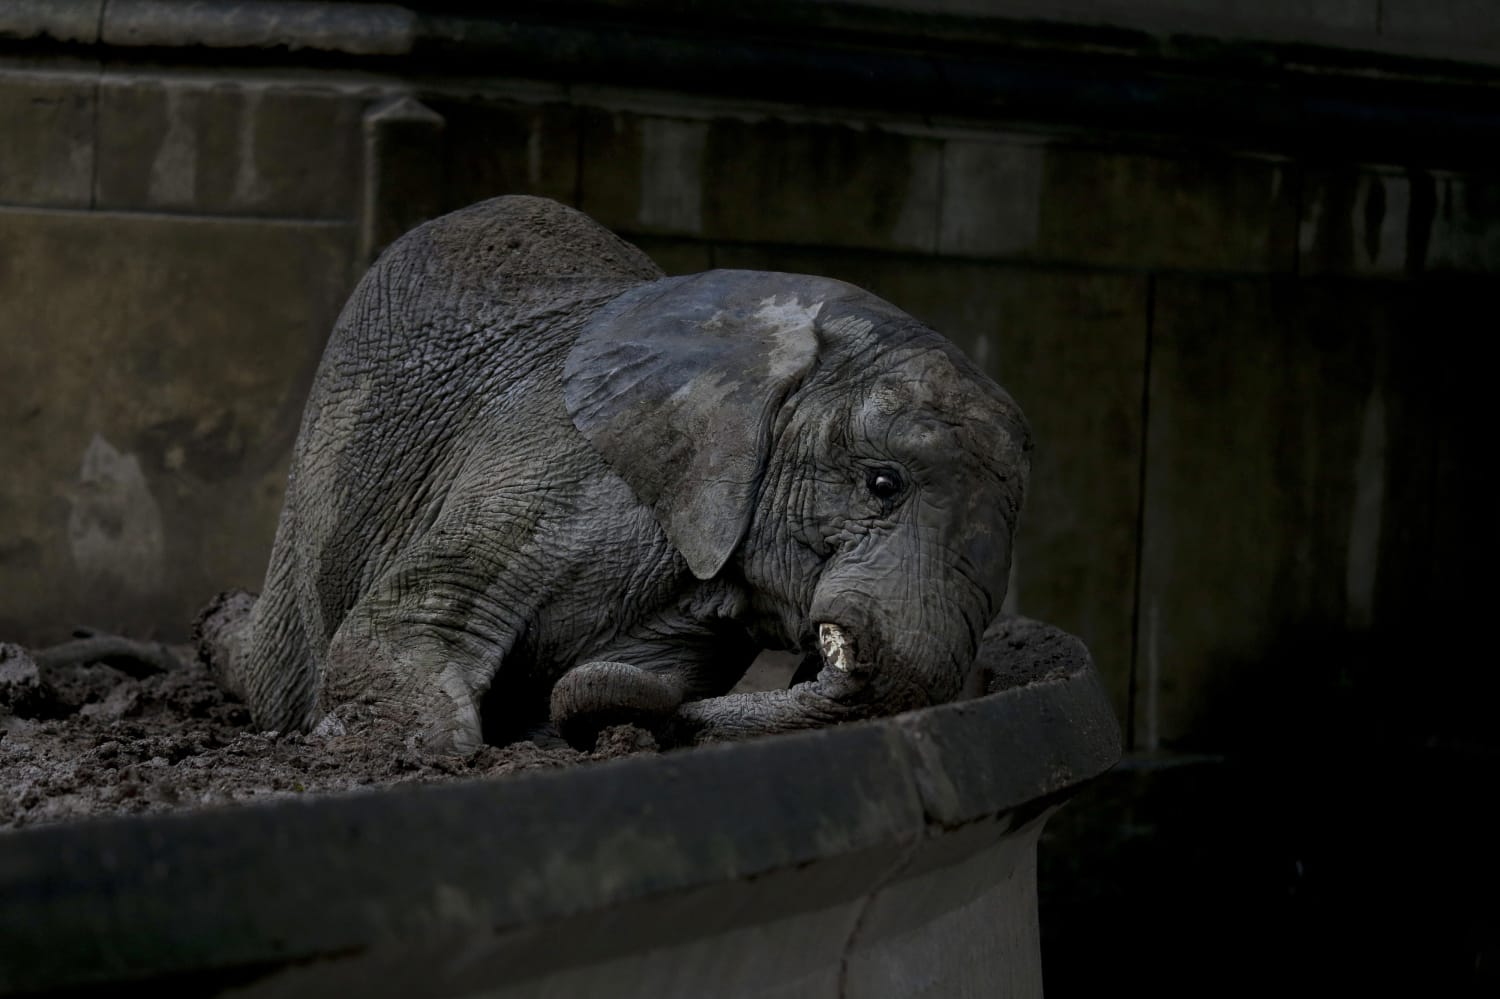 A Year After Zoo Closure, Animals Still Caged in Buenos Aires